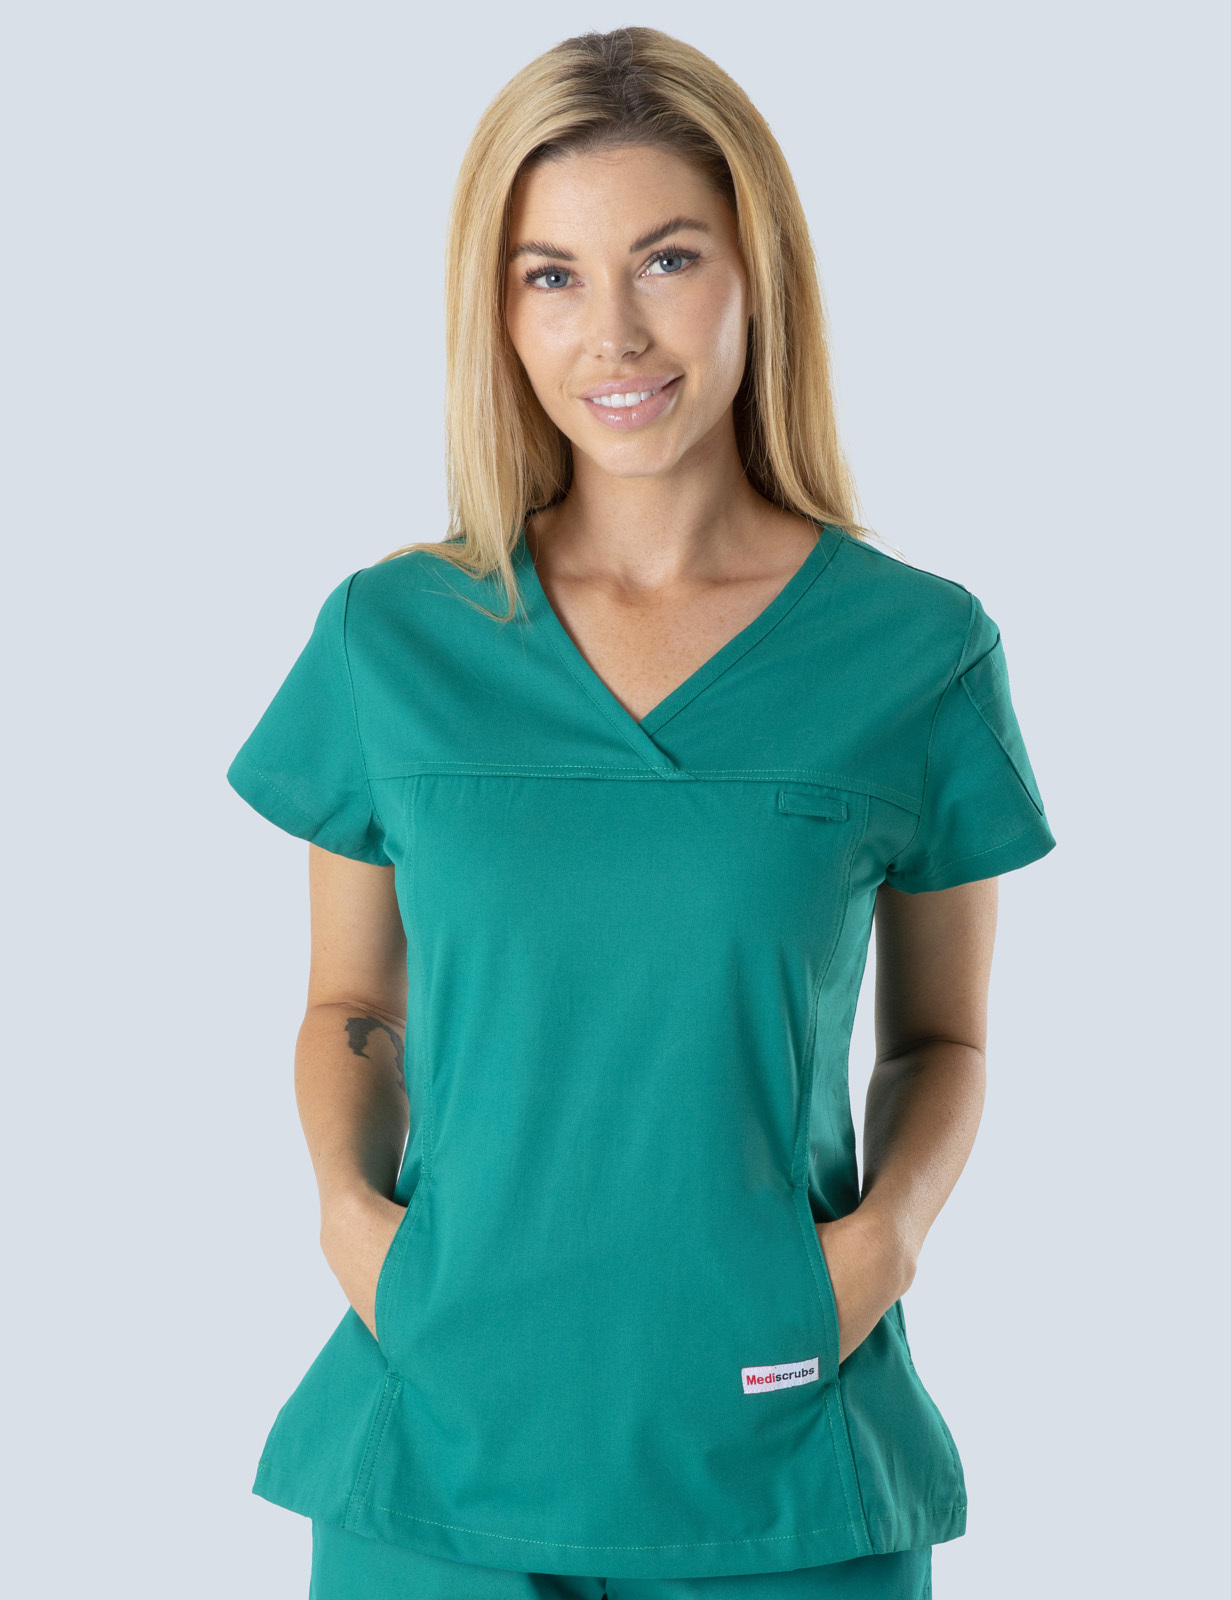 Women's Fit Solid Scrub Top - Hunter - X Large